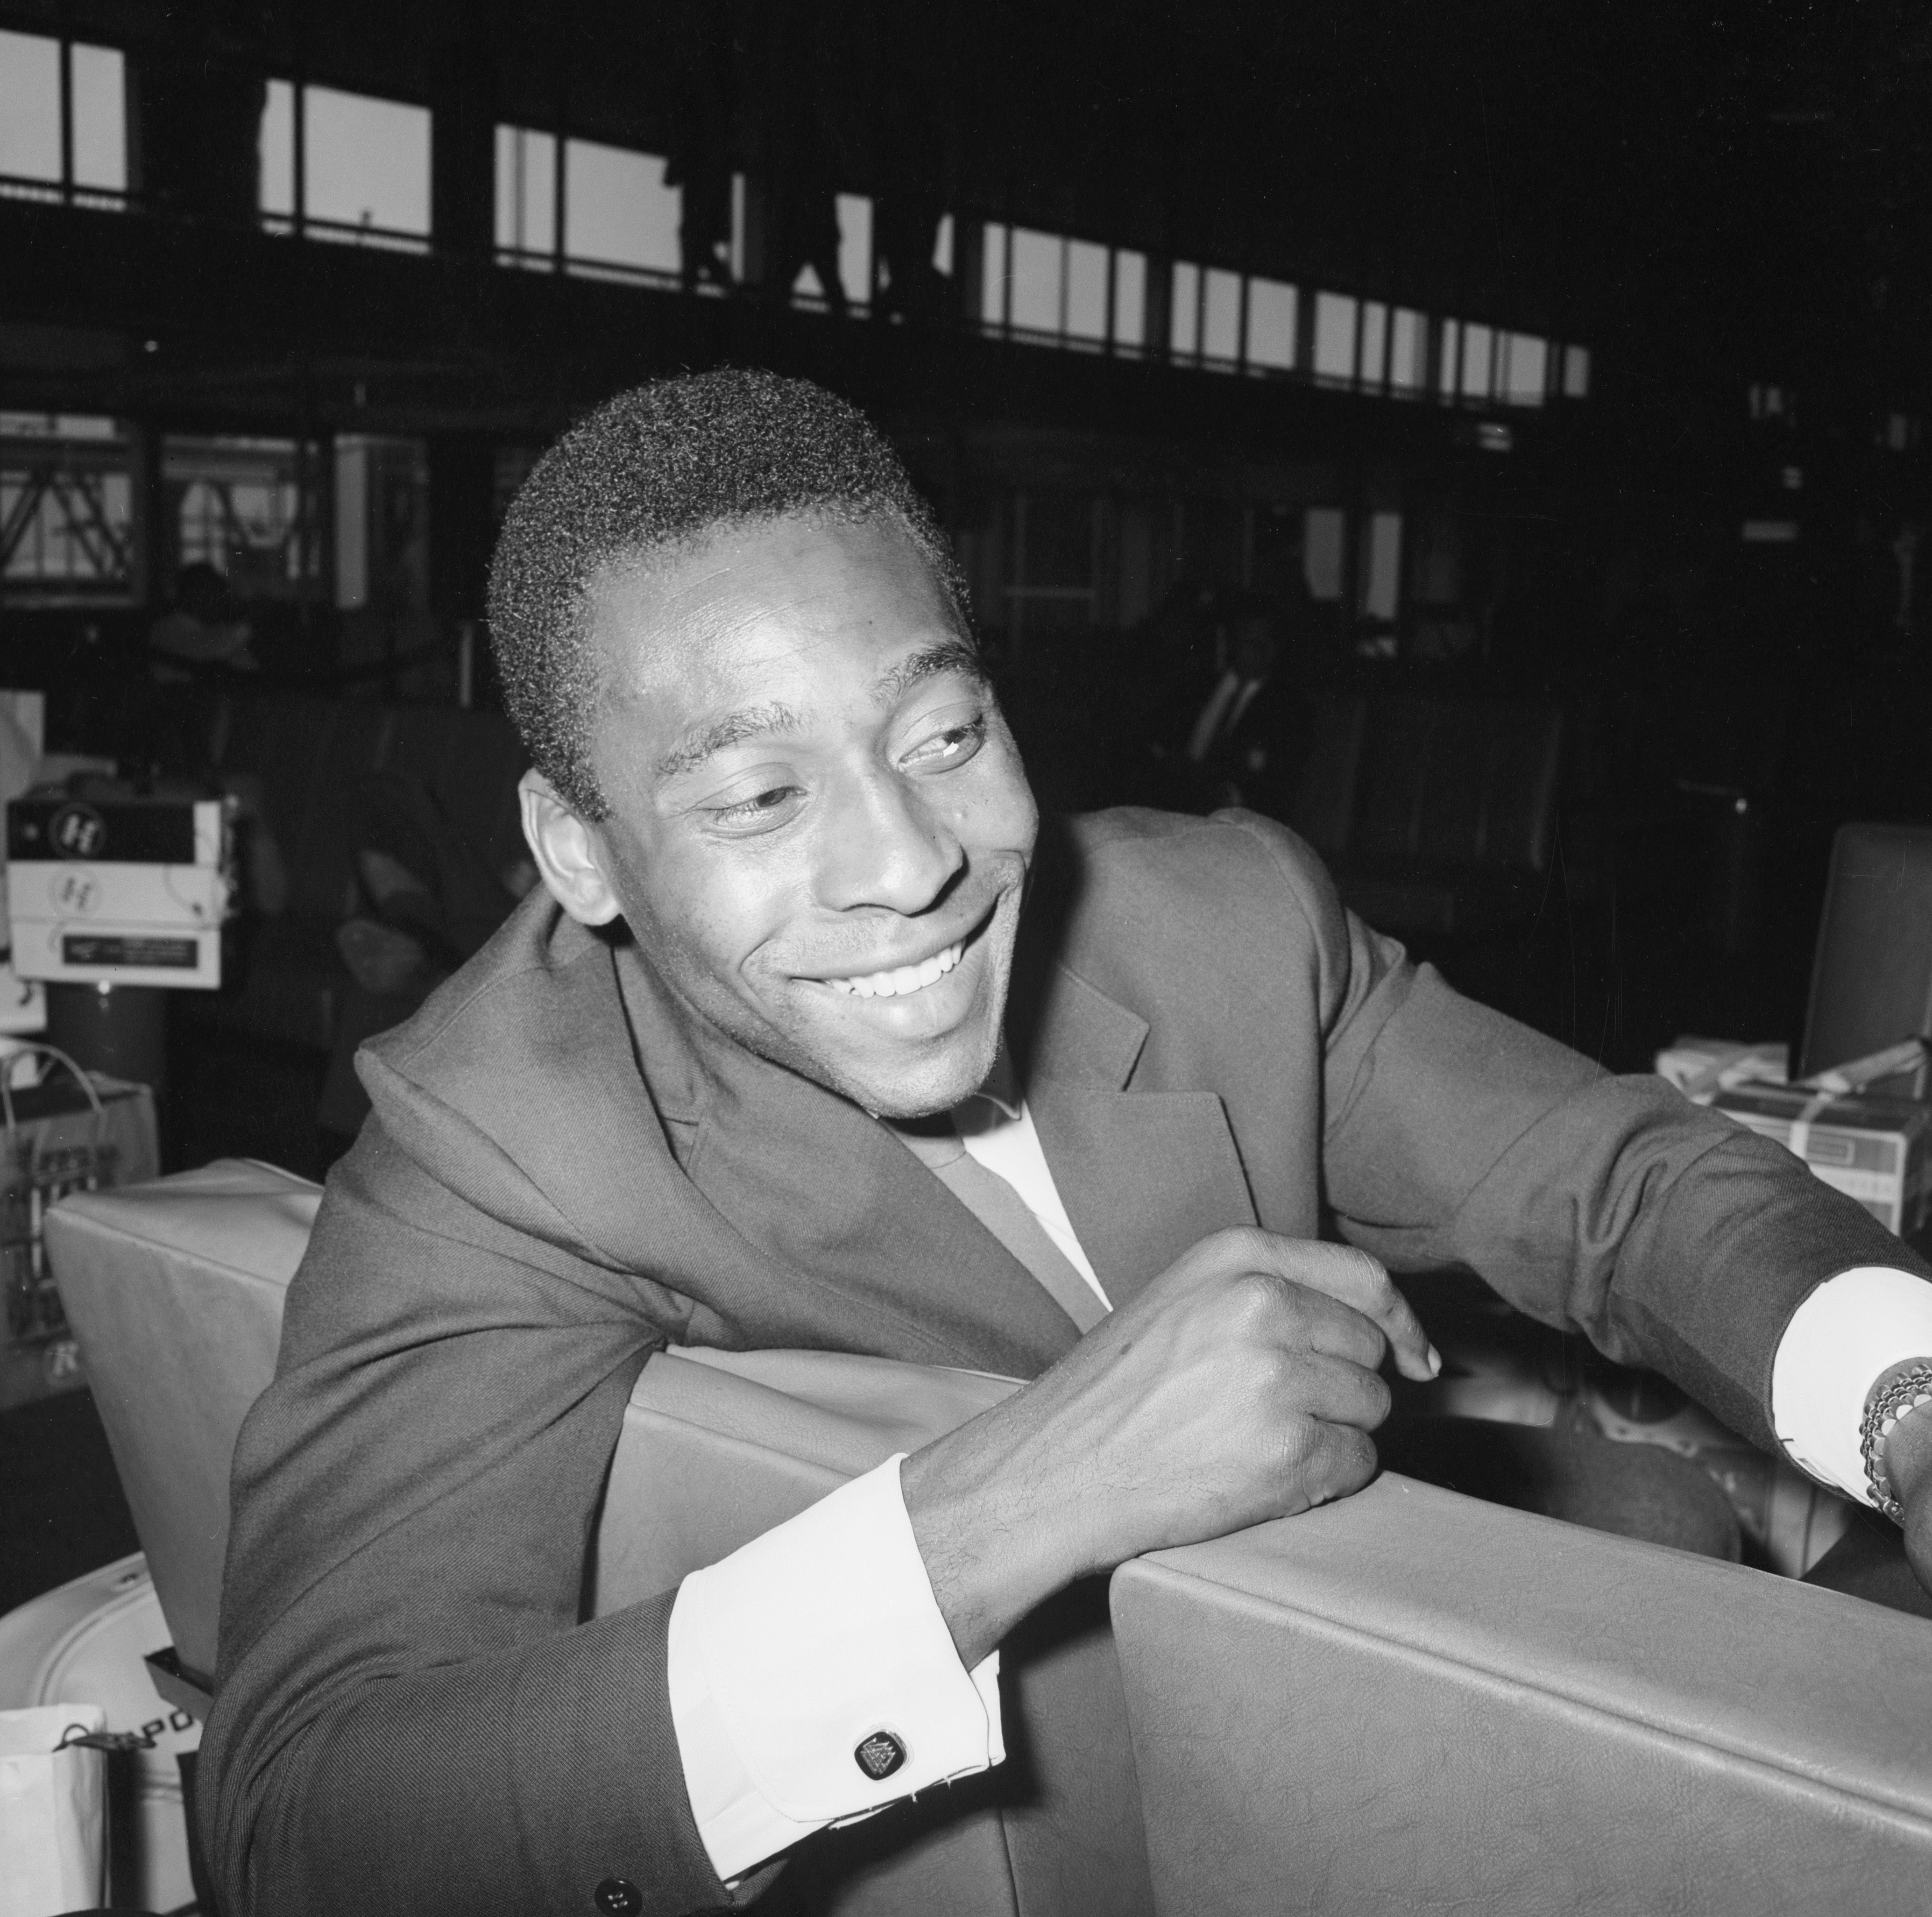 Brazilian footballer Pele waiting at London Airport for his team's plane home after the 1966 World Cup in England, 25th July 1966.